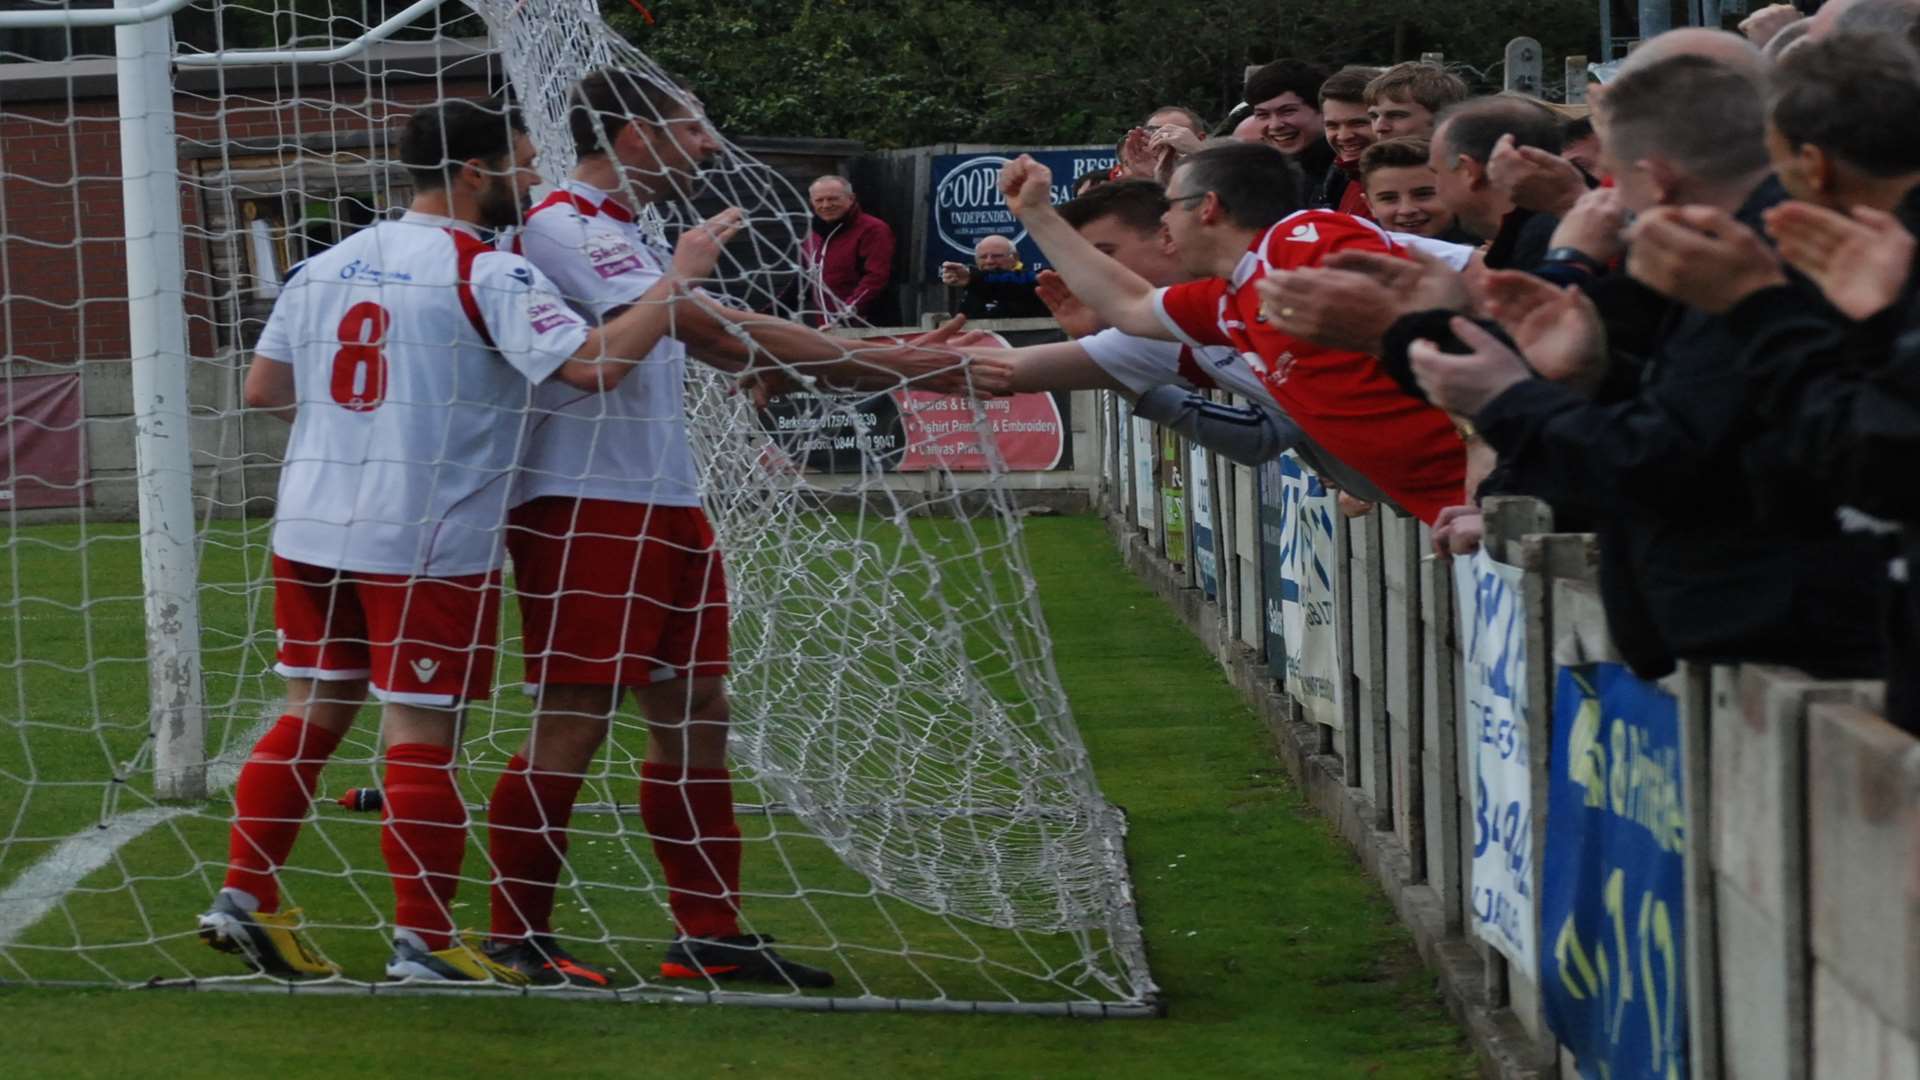 Ben May celebrates his goal at Staines with the Fleet fans Picture: Paul Jarvis